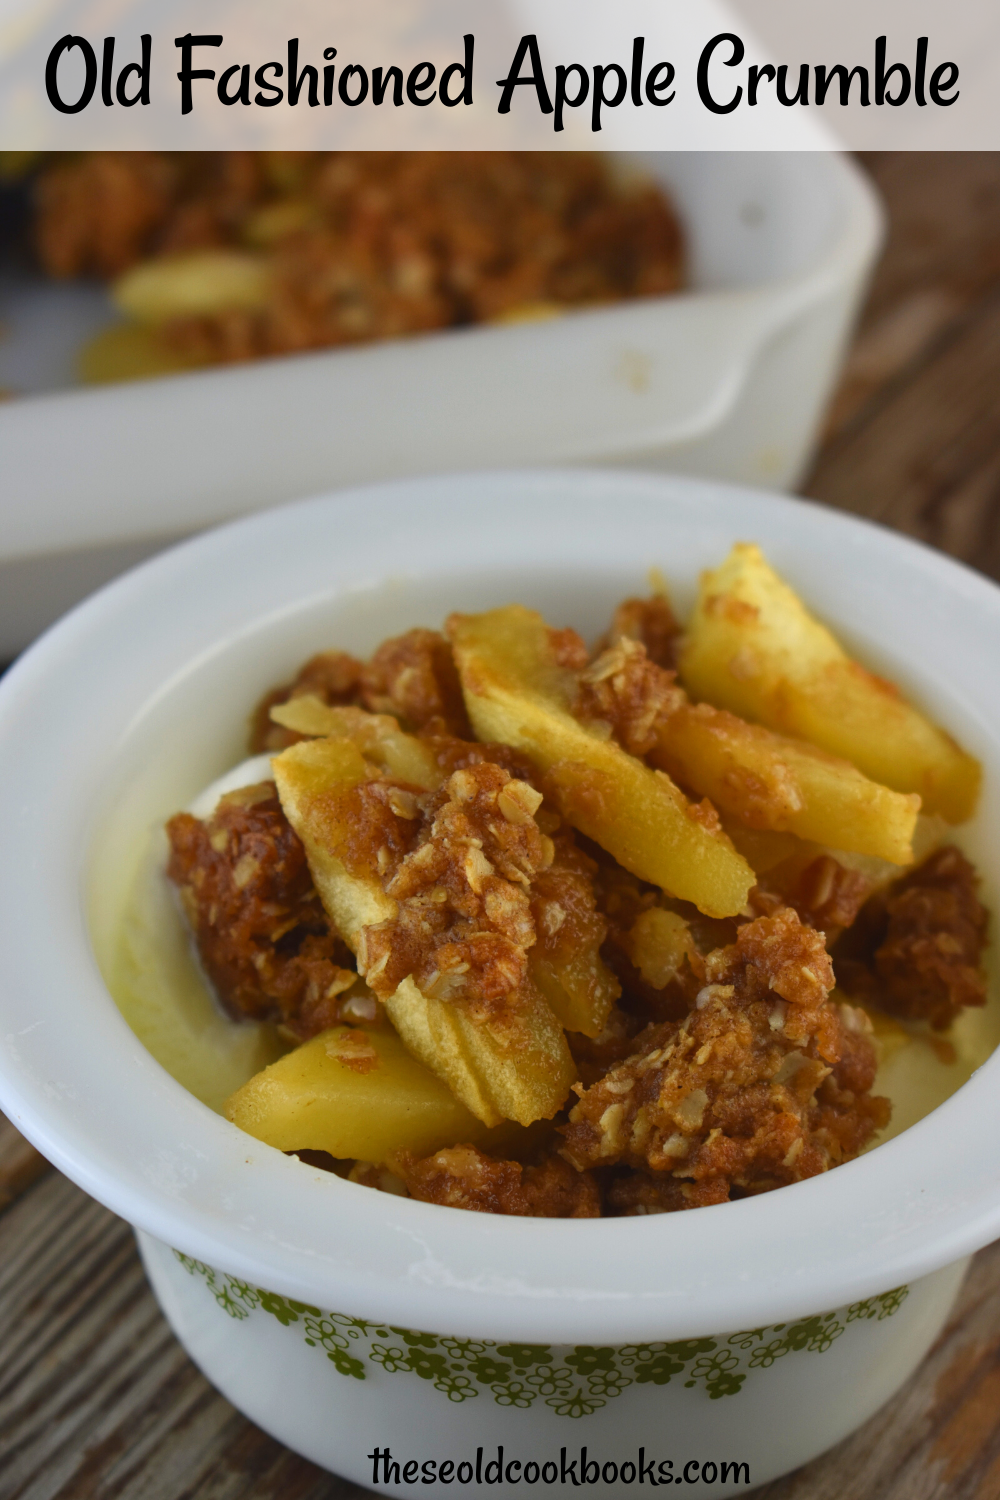 This Old-Fashioned Apple Crumble with Oat Topping has the flavor of butter, cinnamon, brown sugar and apples.  This dessert is one your grandma made back in the day and will still have your family begging for more.